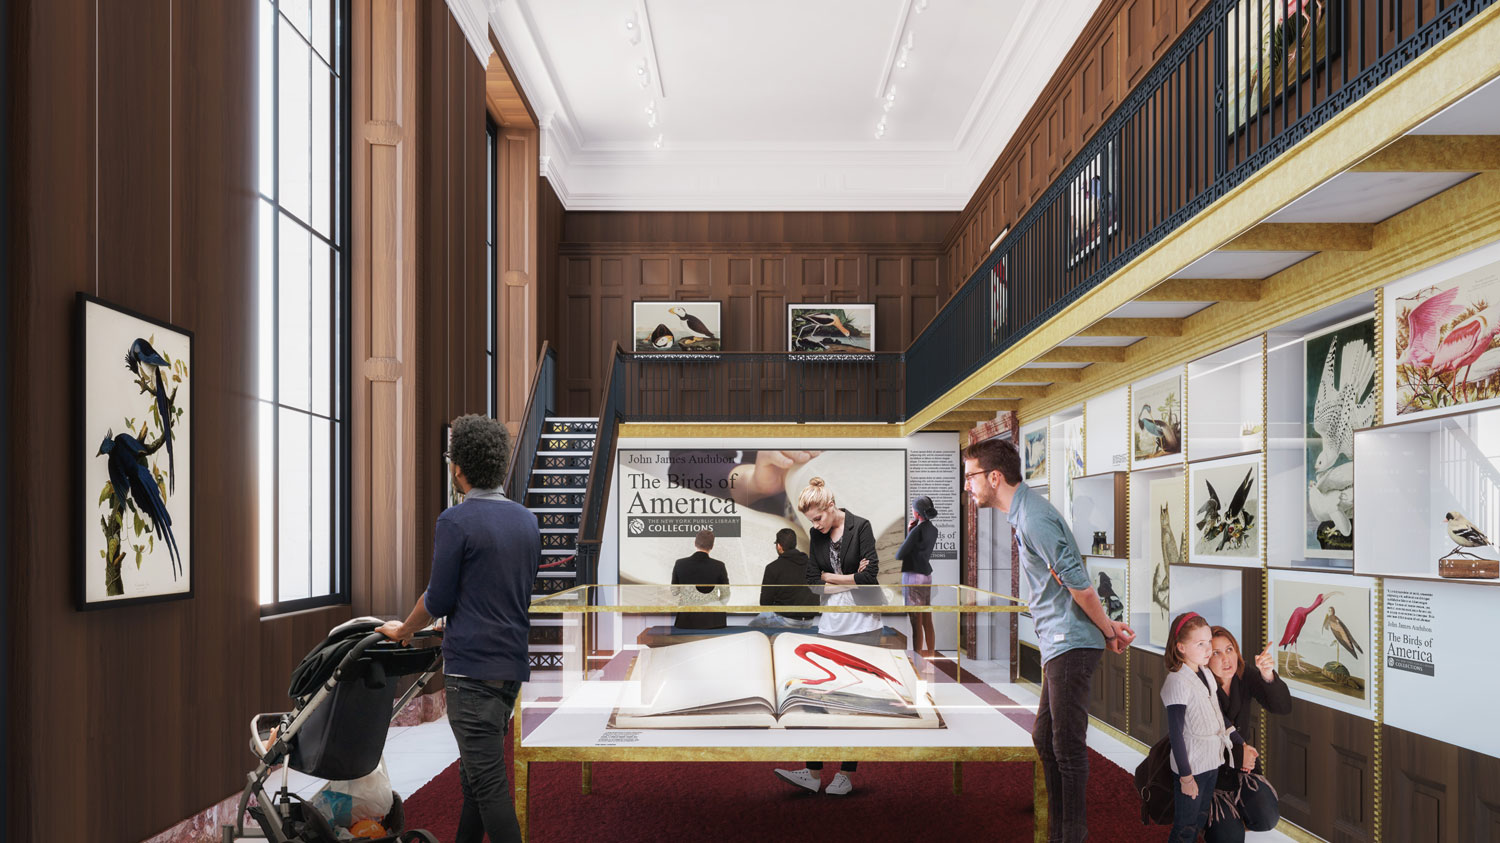 A rendering of a new exhibition space